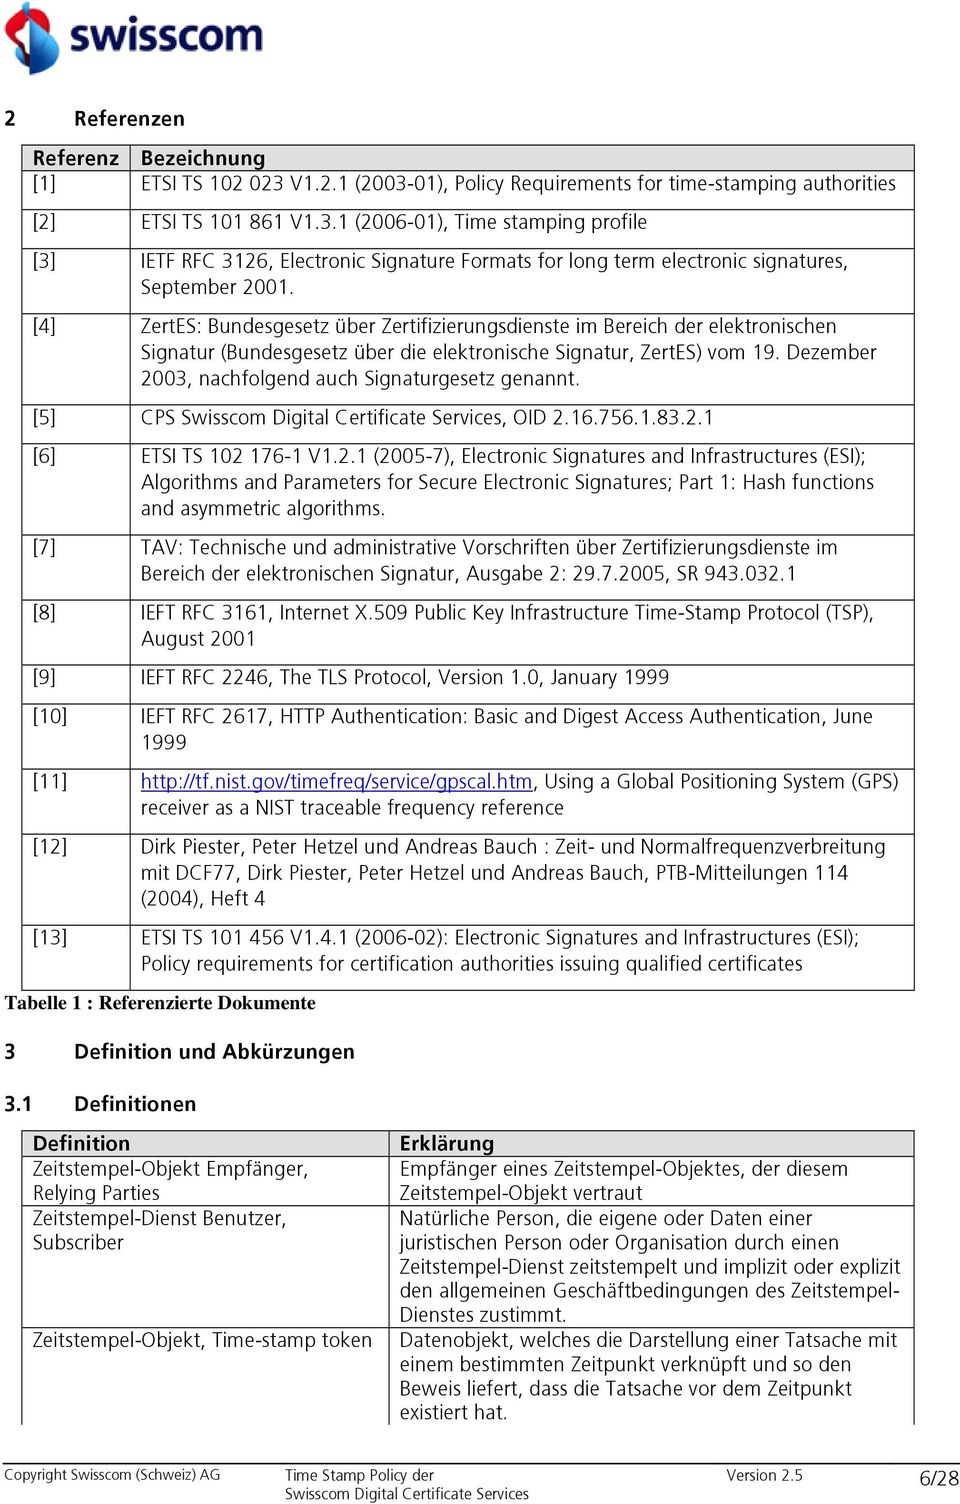 Dezember 2003, nachfolgend auch Signaturgesetz genannt. [5] CPS, OID 2.16.756.1.83.2.1 [6] ETSI TS 102 176-1 V1.2.1 (2005-7), Electronic Signatures and Infrastructures (ESI); Algorithms and Parameters for Secure Electronic Signatures; Part 1: Hash functions and asymmetric algorithms.